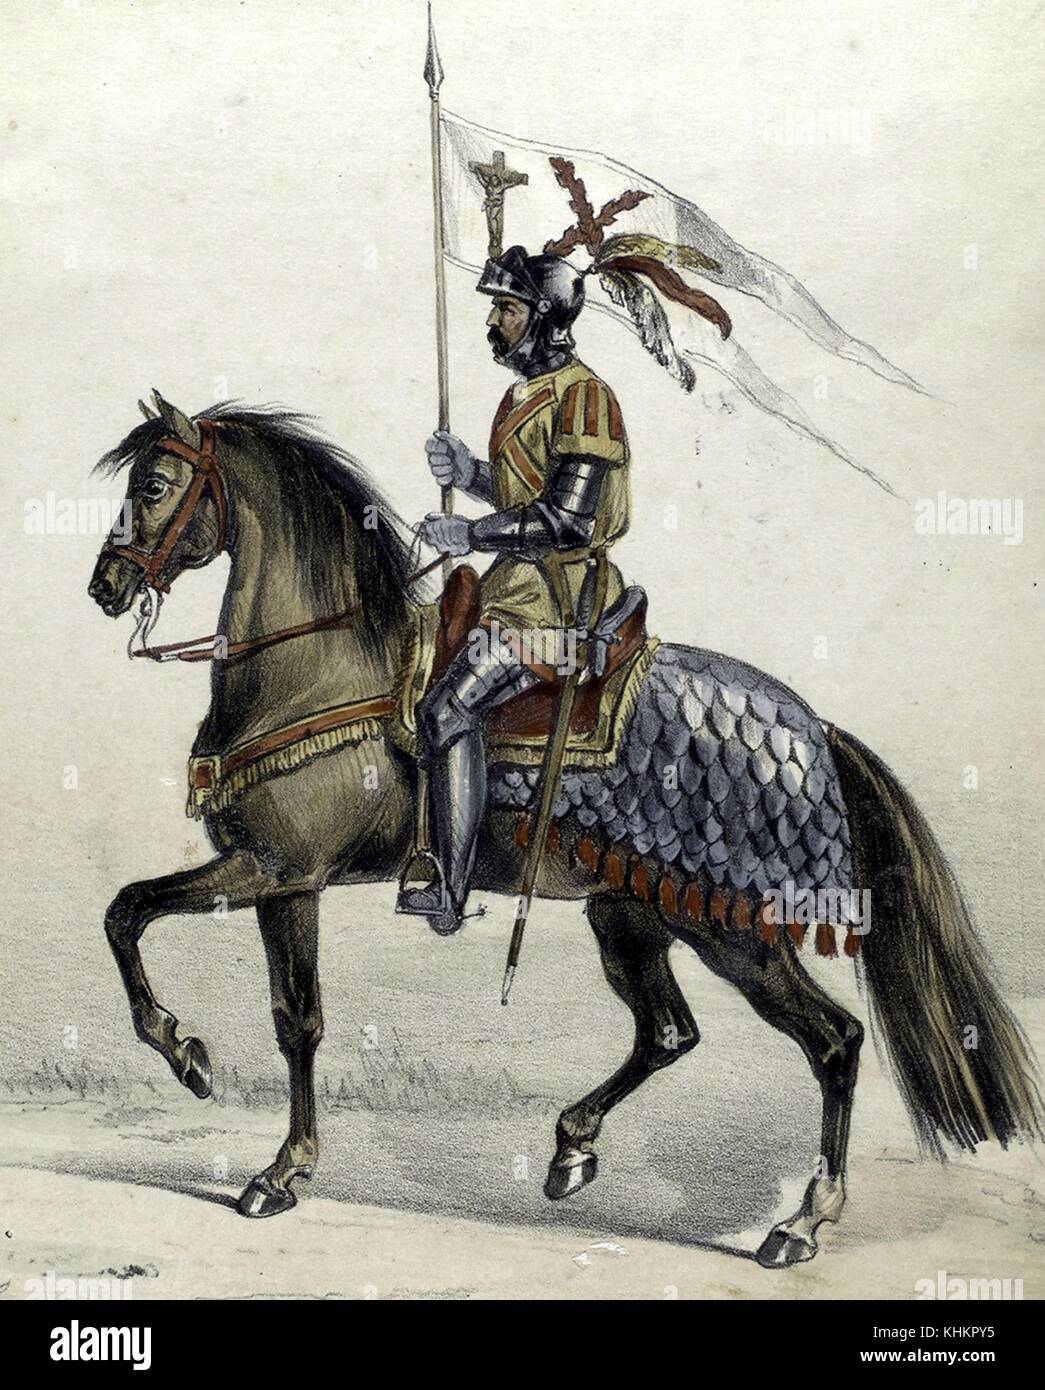 A color lithograph of a Spanish soldier in military uniform, this soldier wears full body armor covered in a cloth tunic, he is riding a horse that is also covered with an armor blanket, he is carrying a banner that is the Spanish land battle flag, it contains an image of the crucifixion and the Cross of Burgundy, 1525. From the New York Public Library. Stock Photo